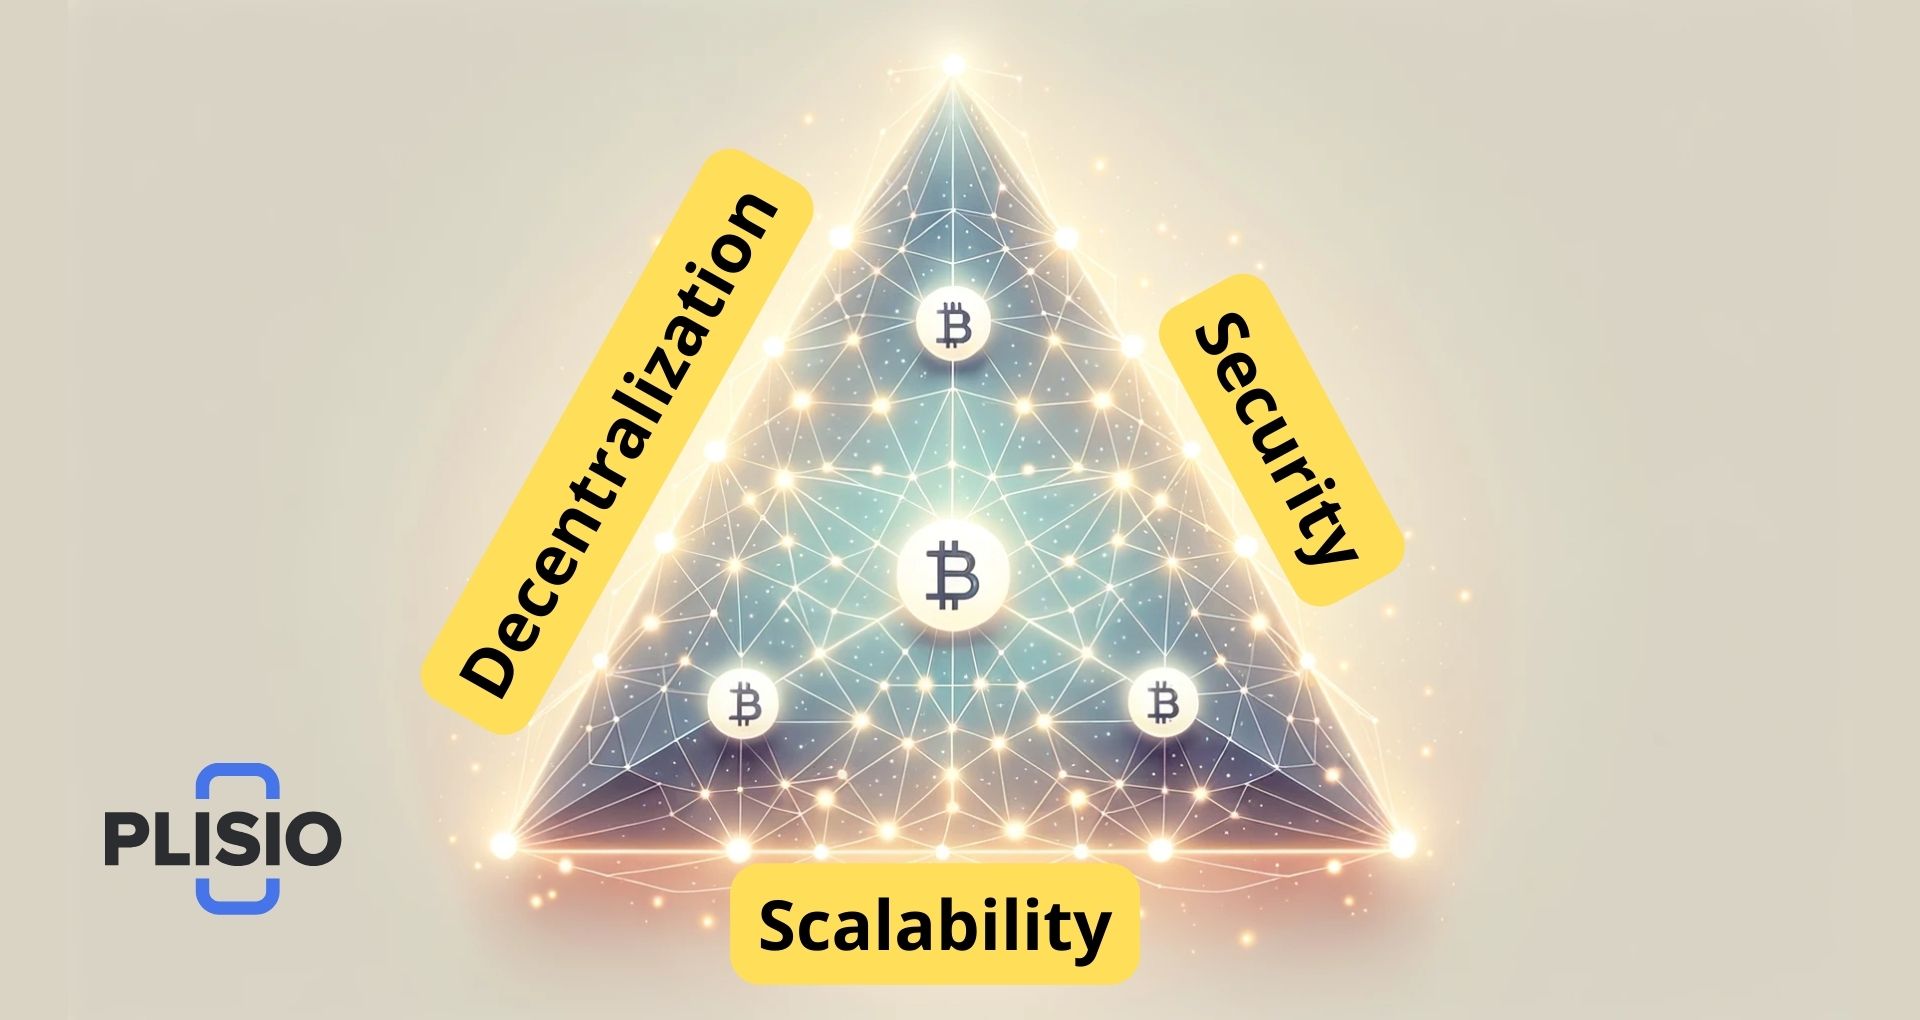 What is the Blockchain Trilemma?